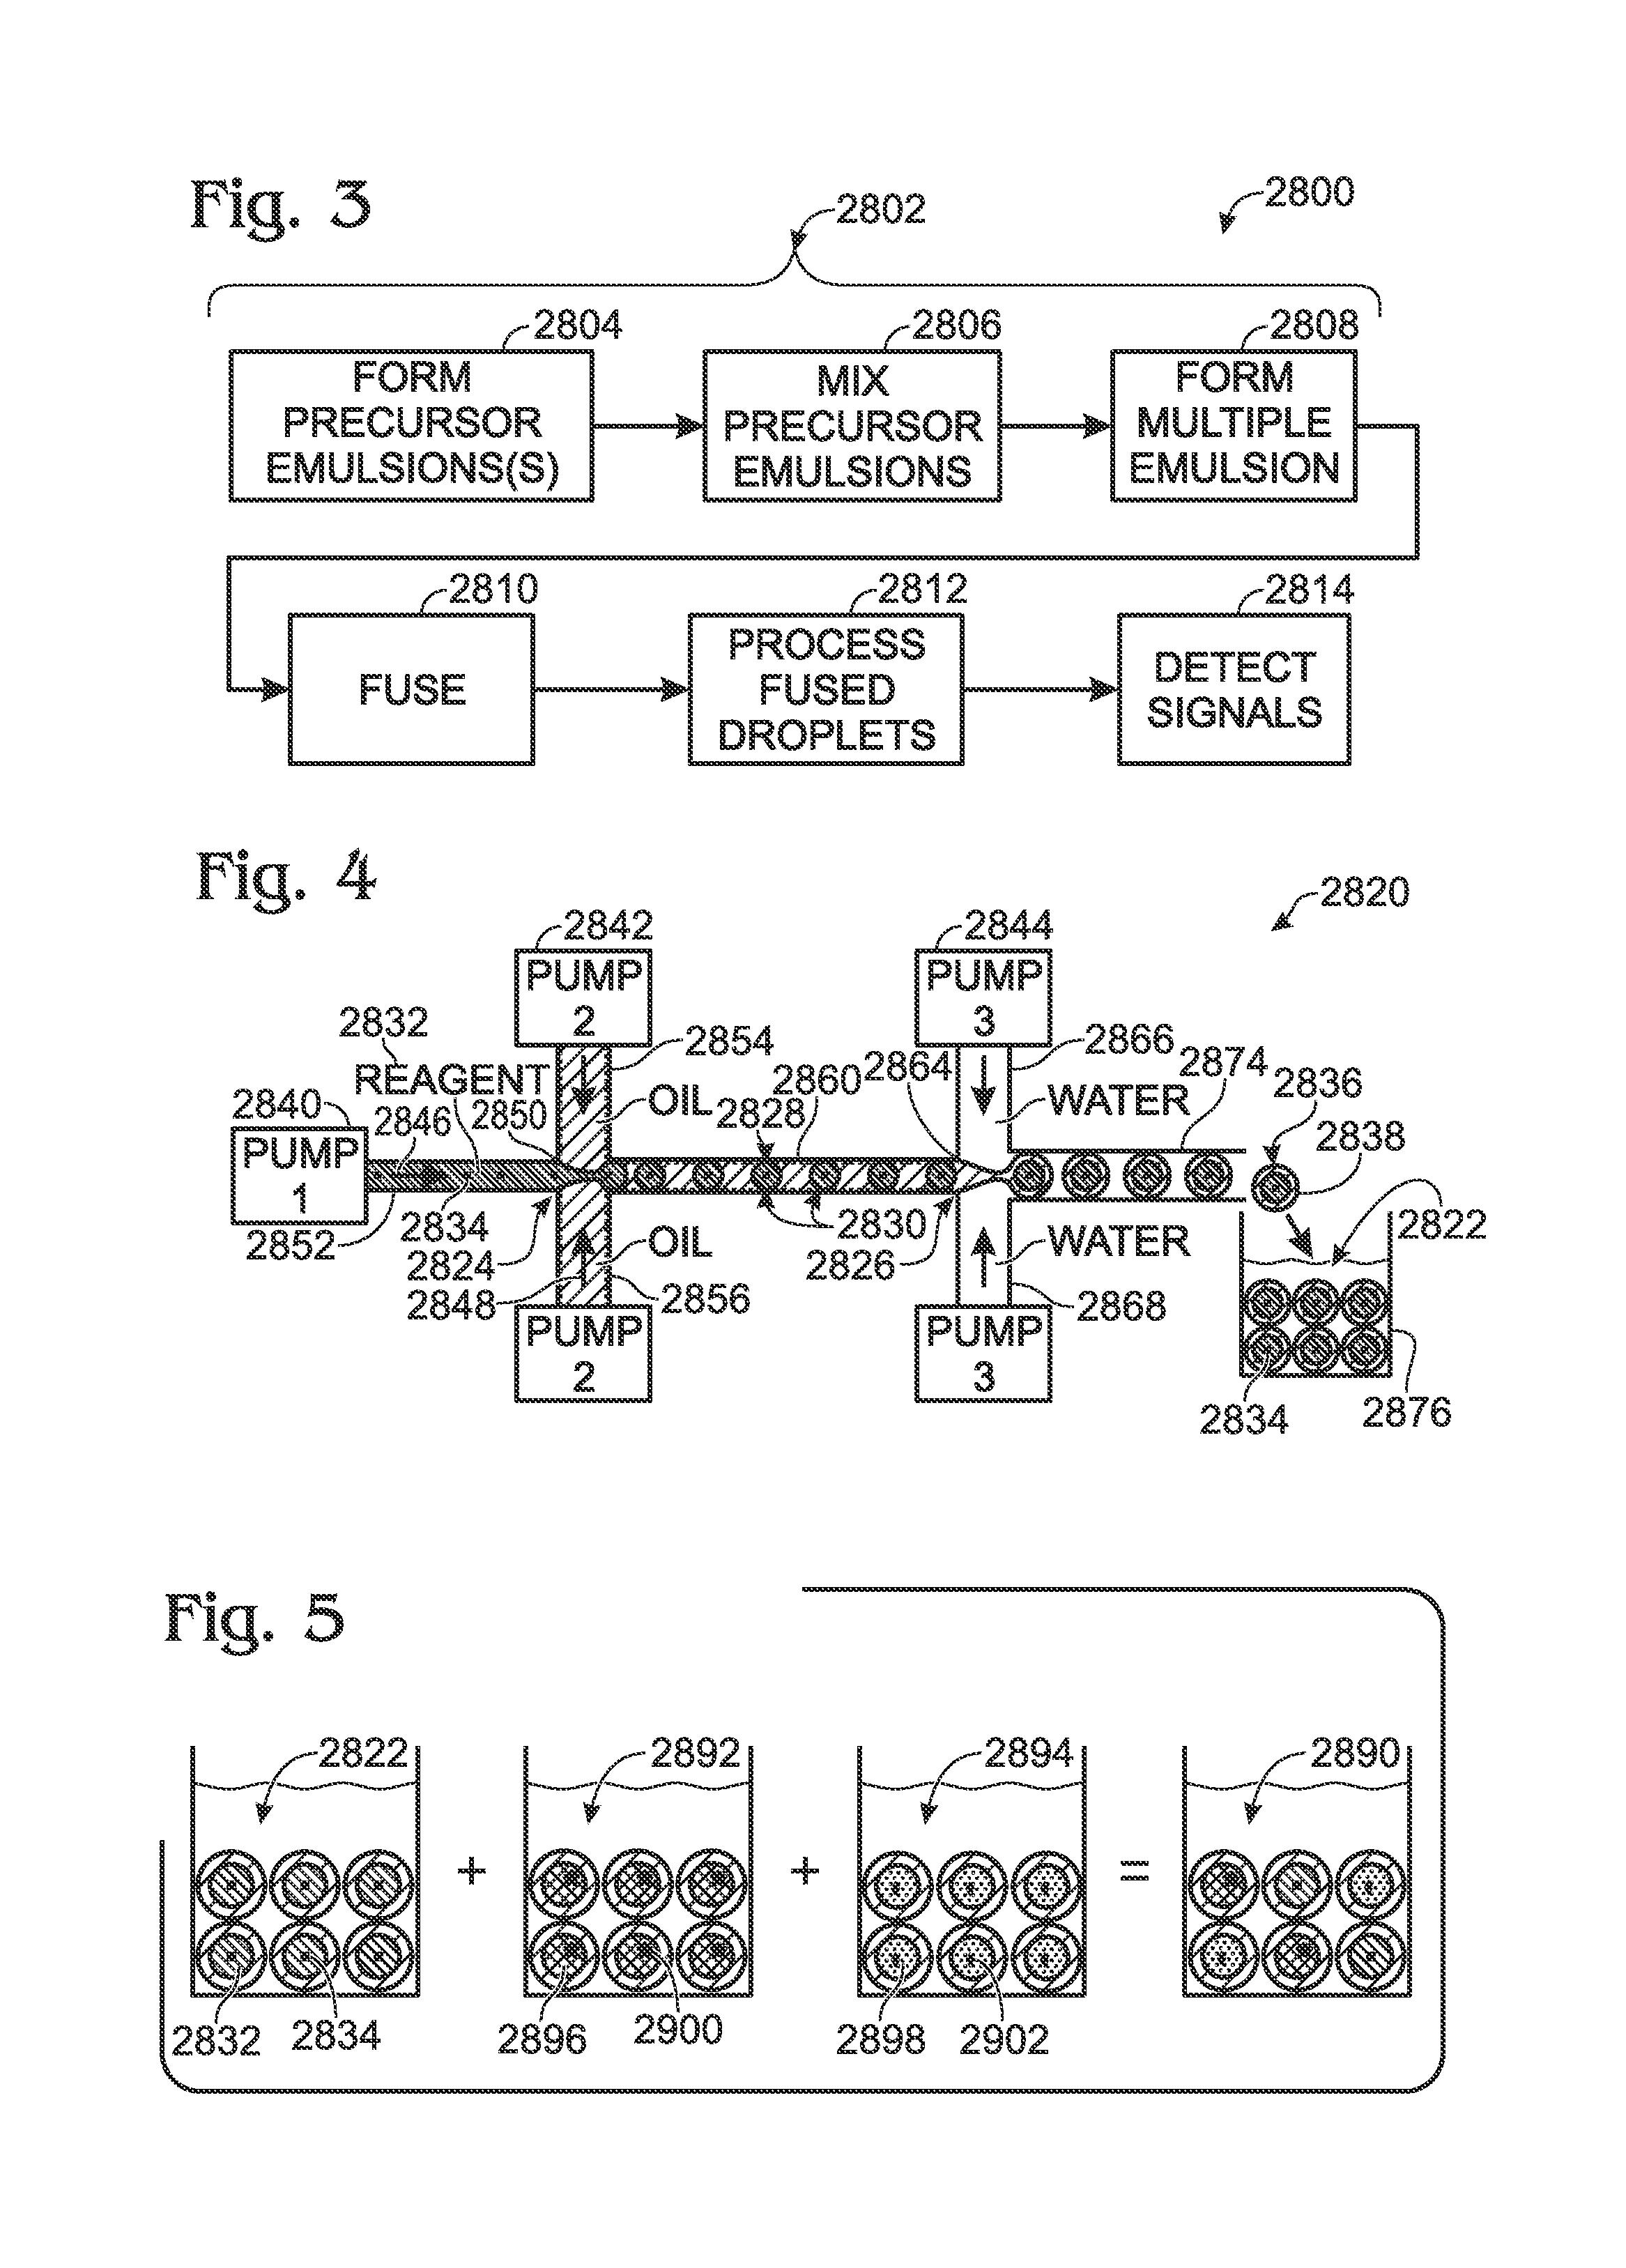 Method of mixing fluids by coalescence of multiple emulsions